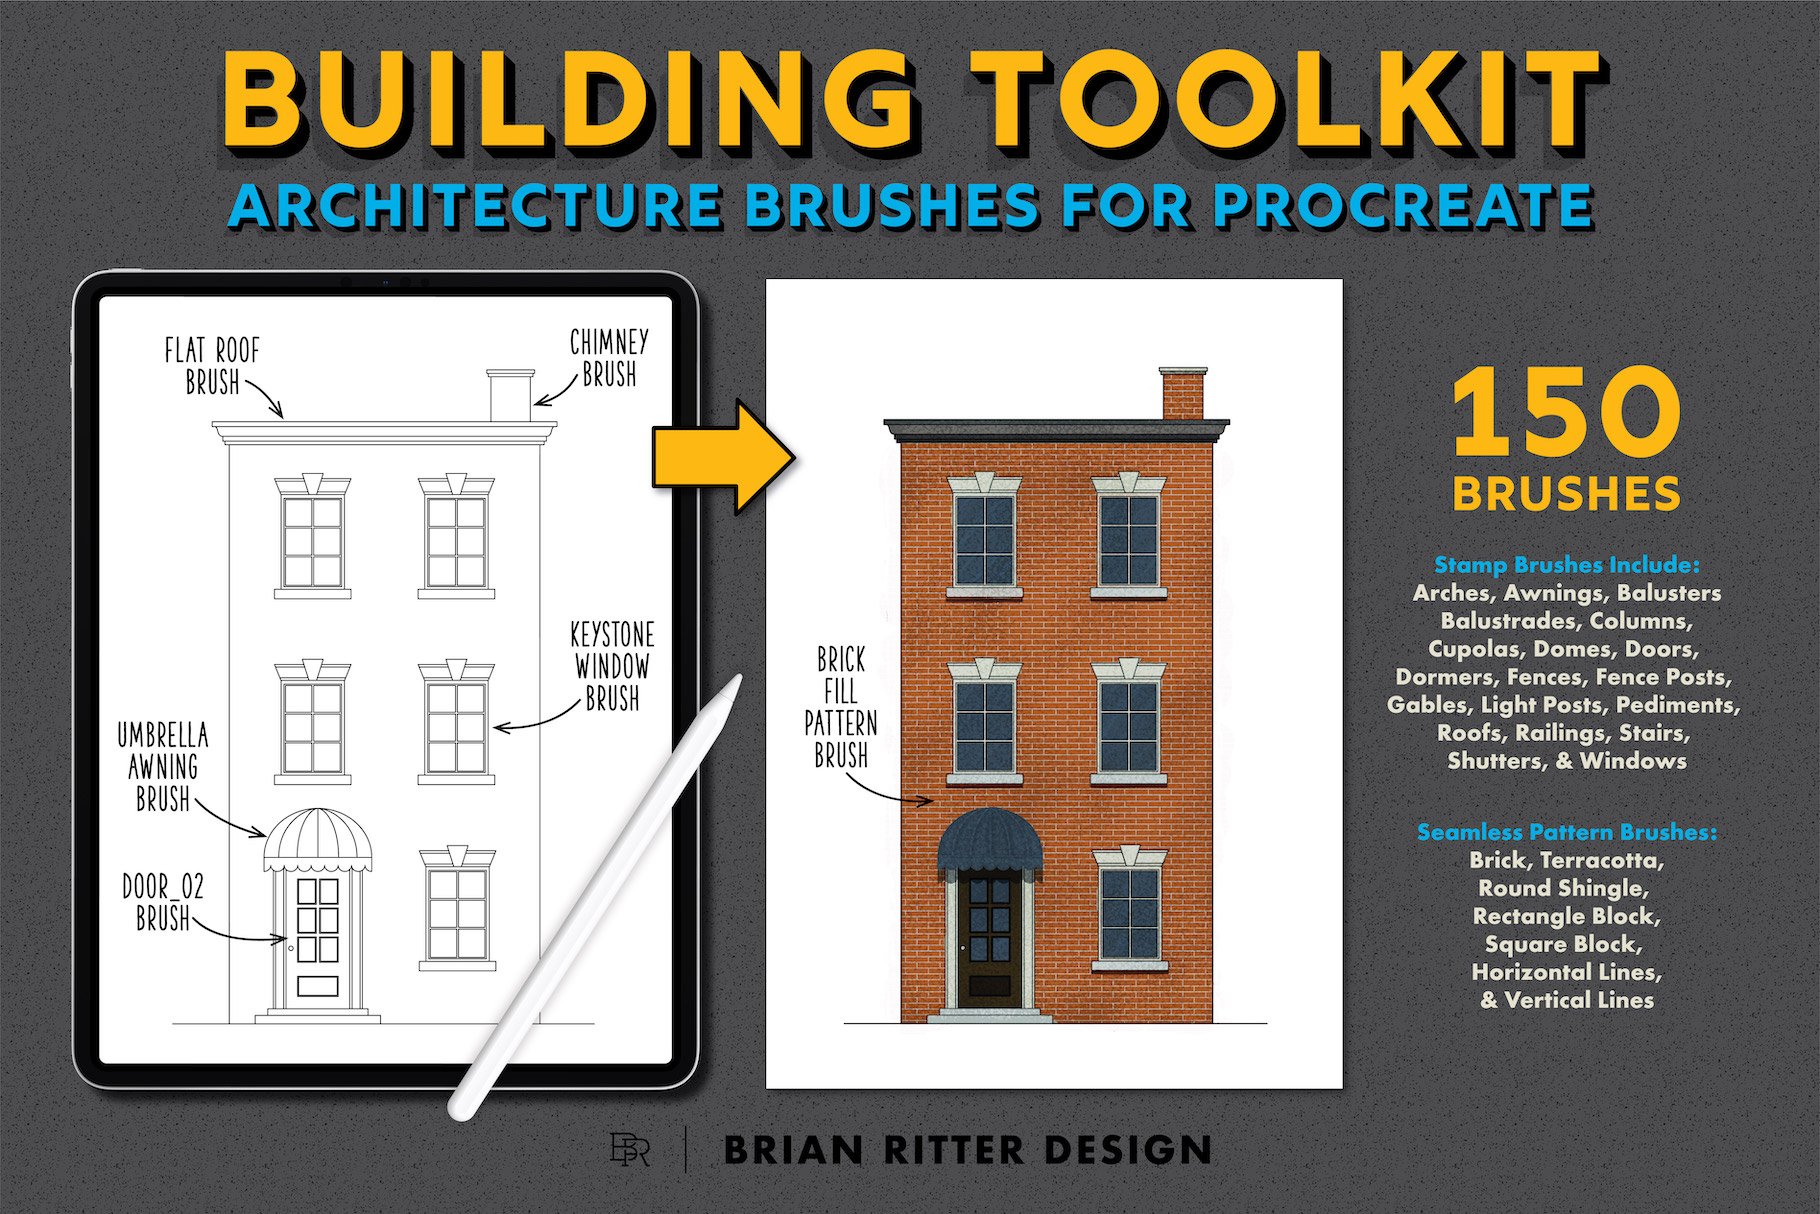 Building Toolkit For Procreatepreview image.